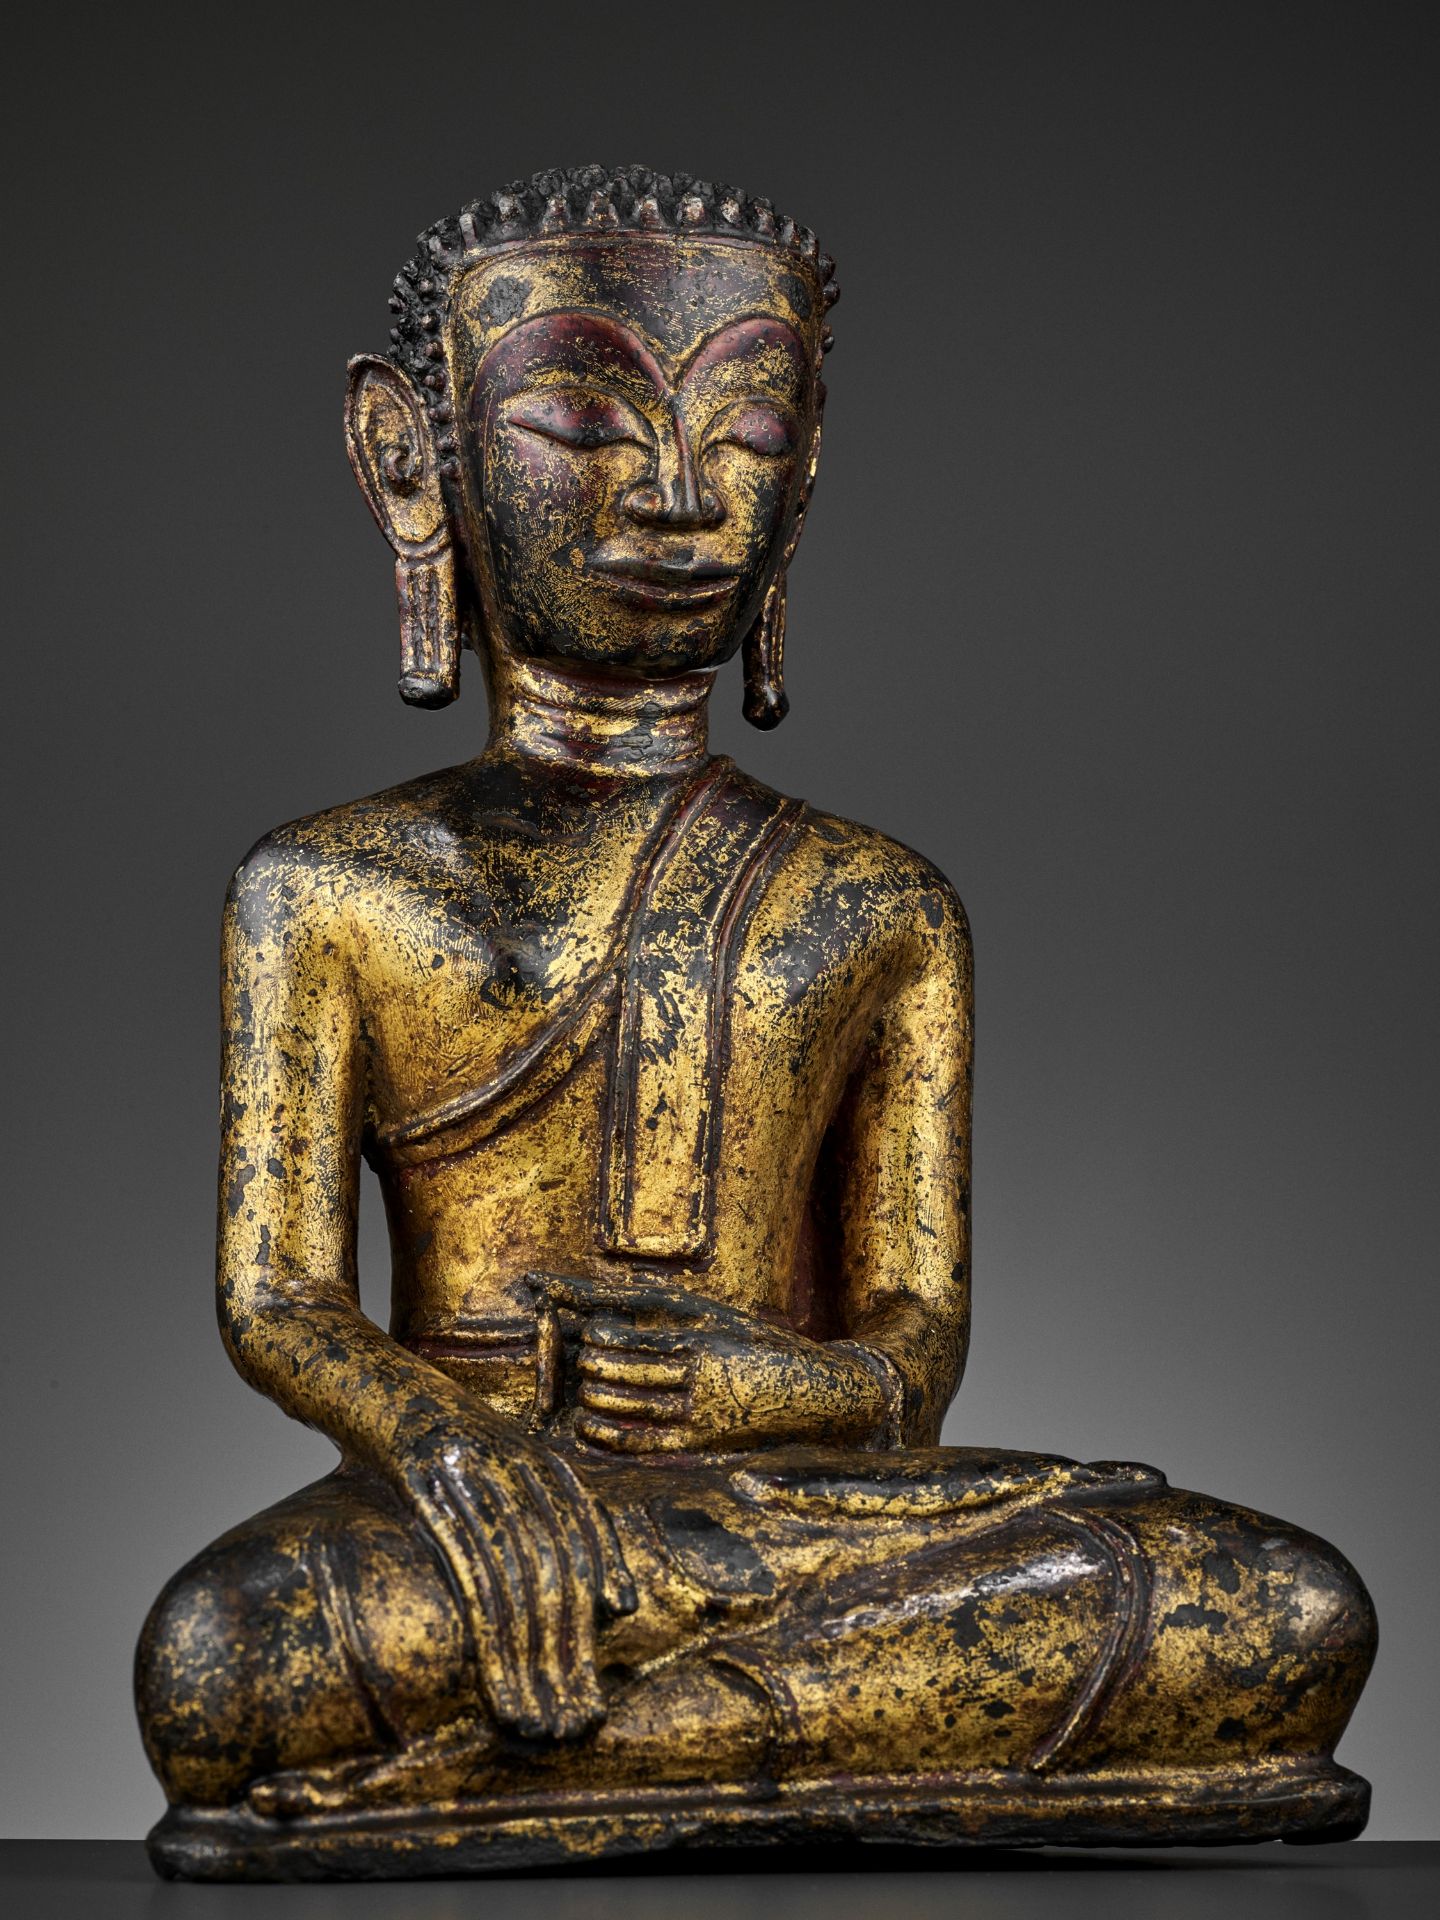 A HEAVILY CAST, GILT-LACQUERED BRONZE OF BUDDHA, 17TH-18TH CENTURY